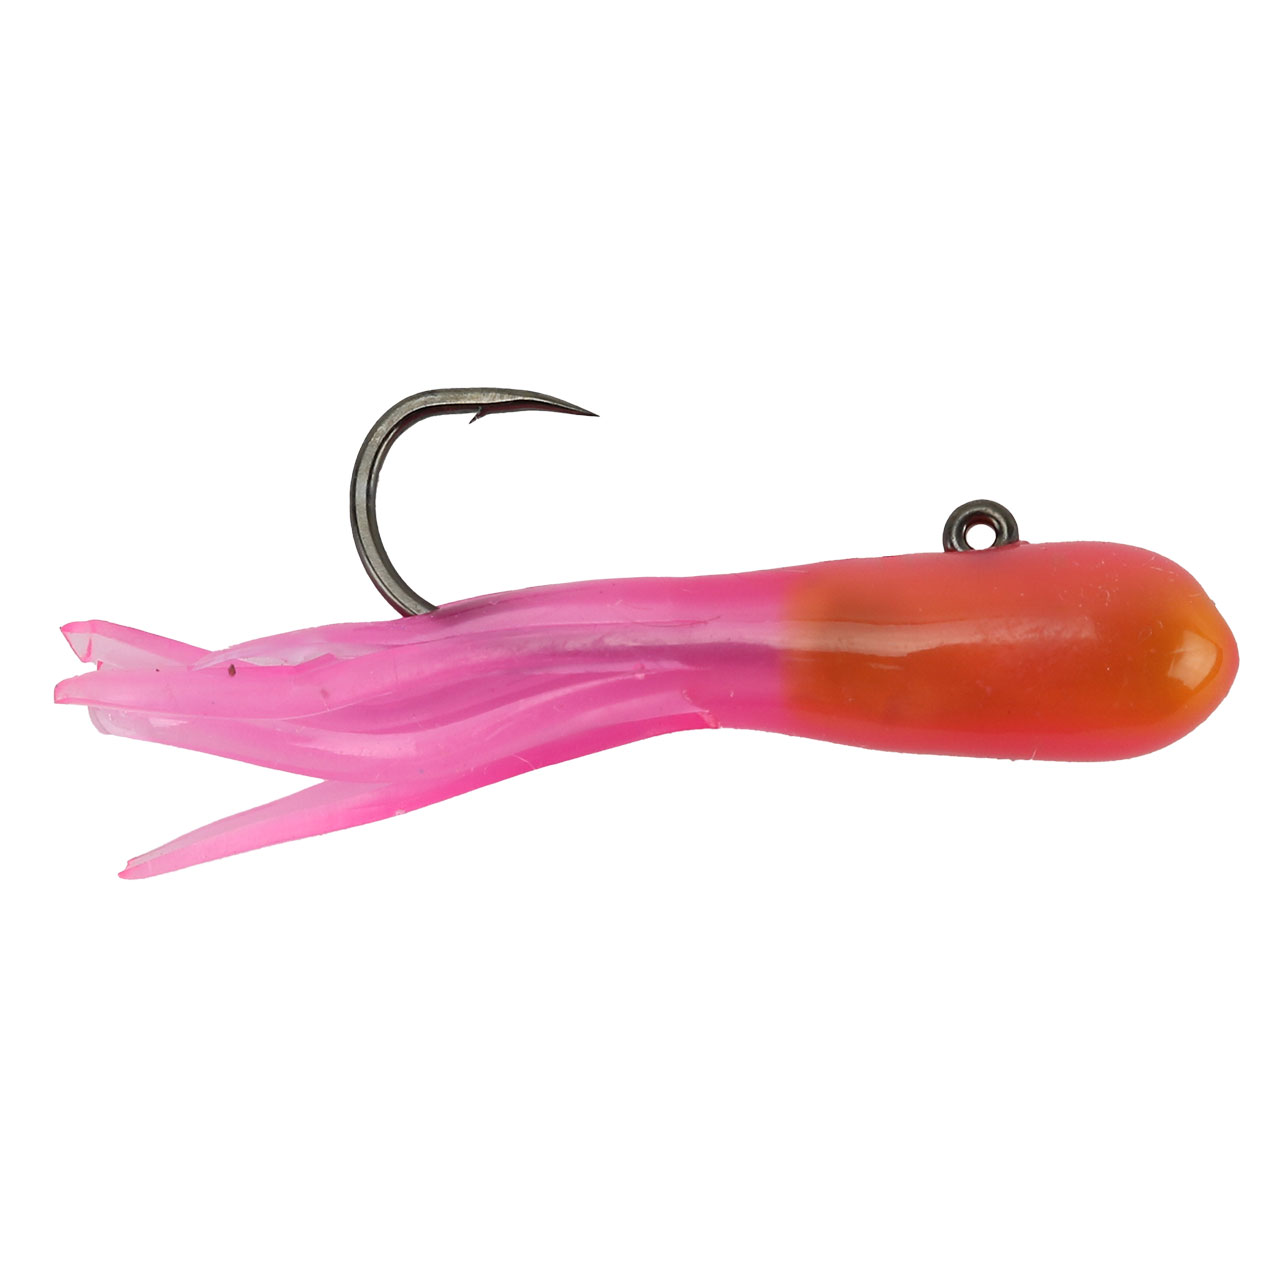 Taupo Tiger Trout Fishing Lure - Badger hackles and red head